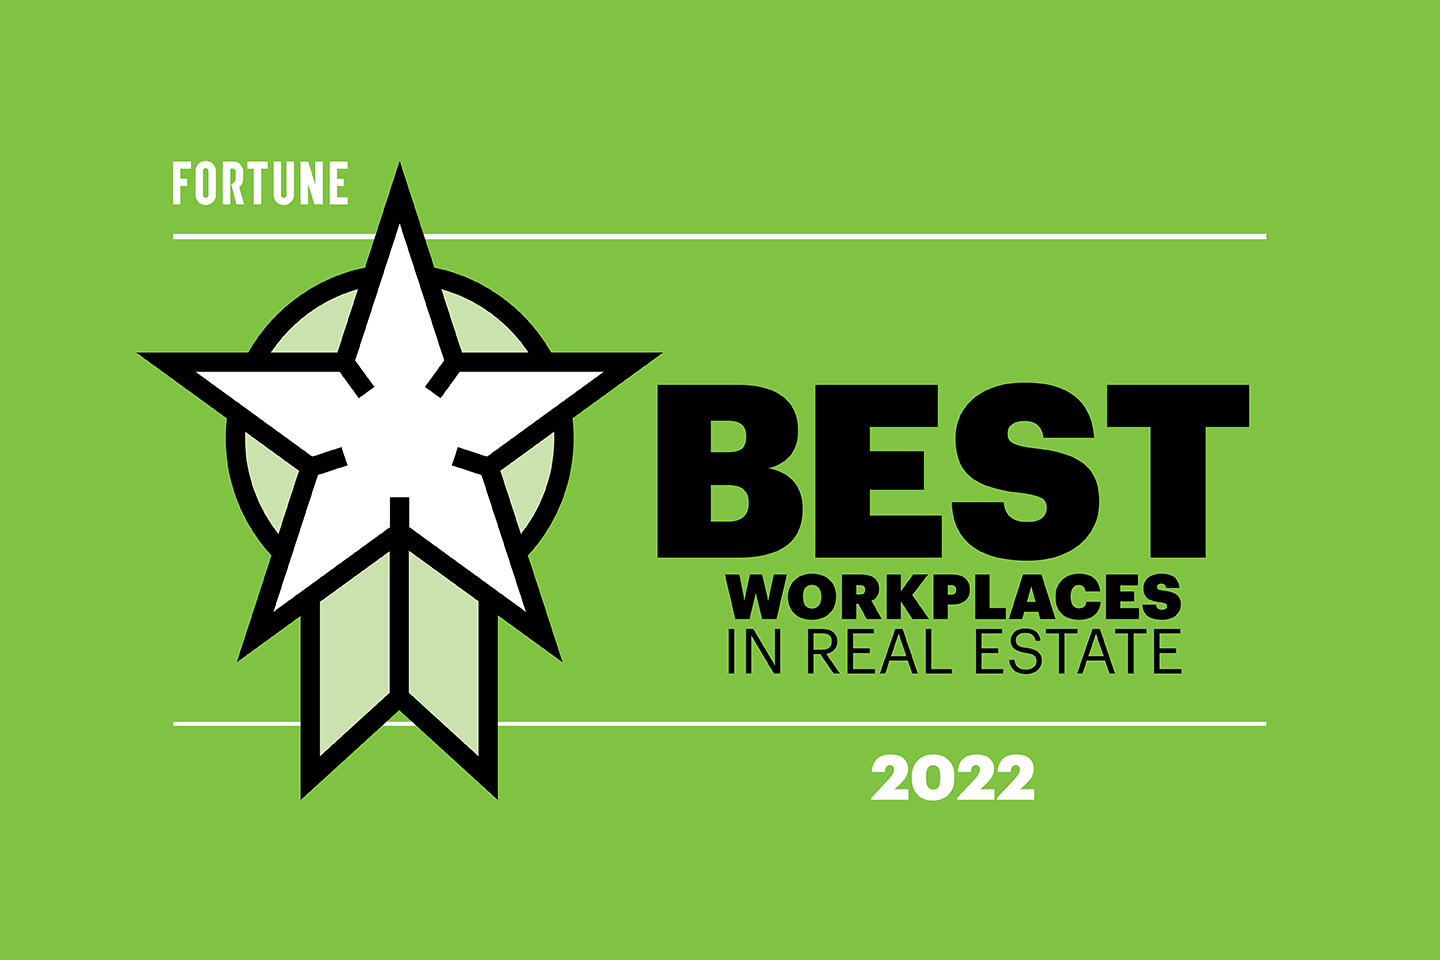 35 Best Workplaces in Real Estate